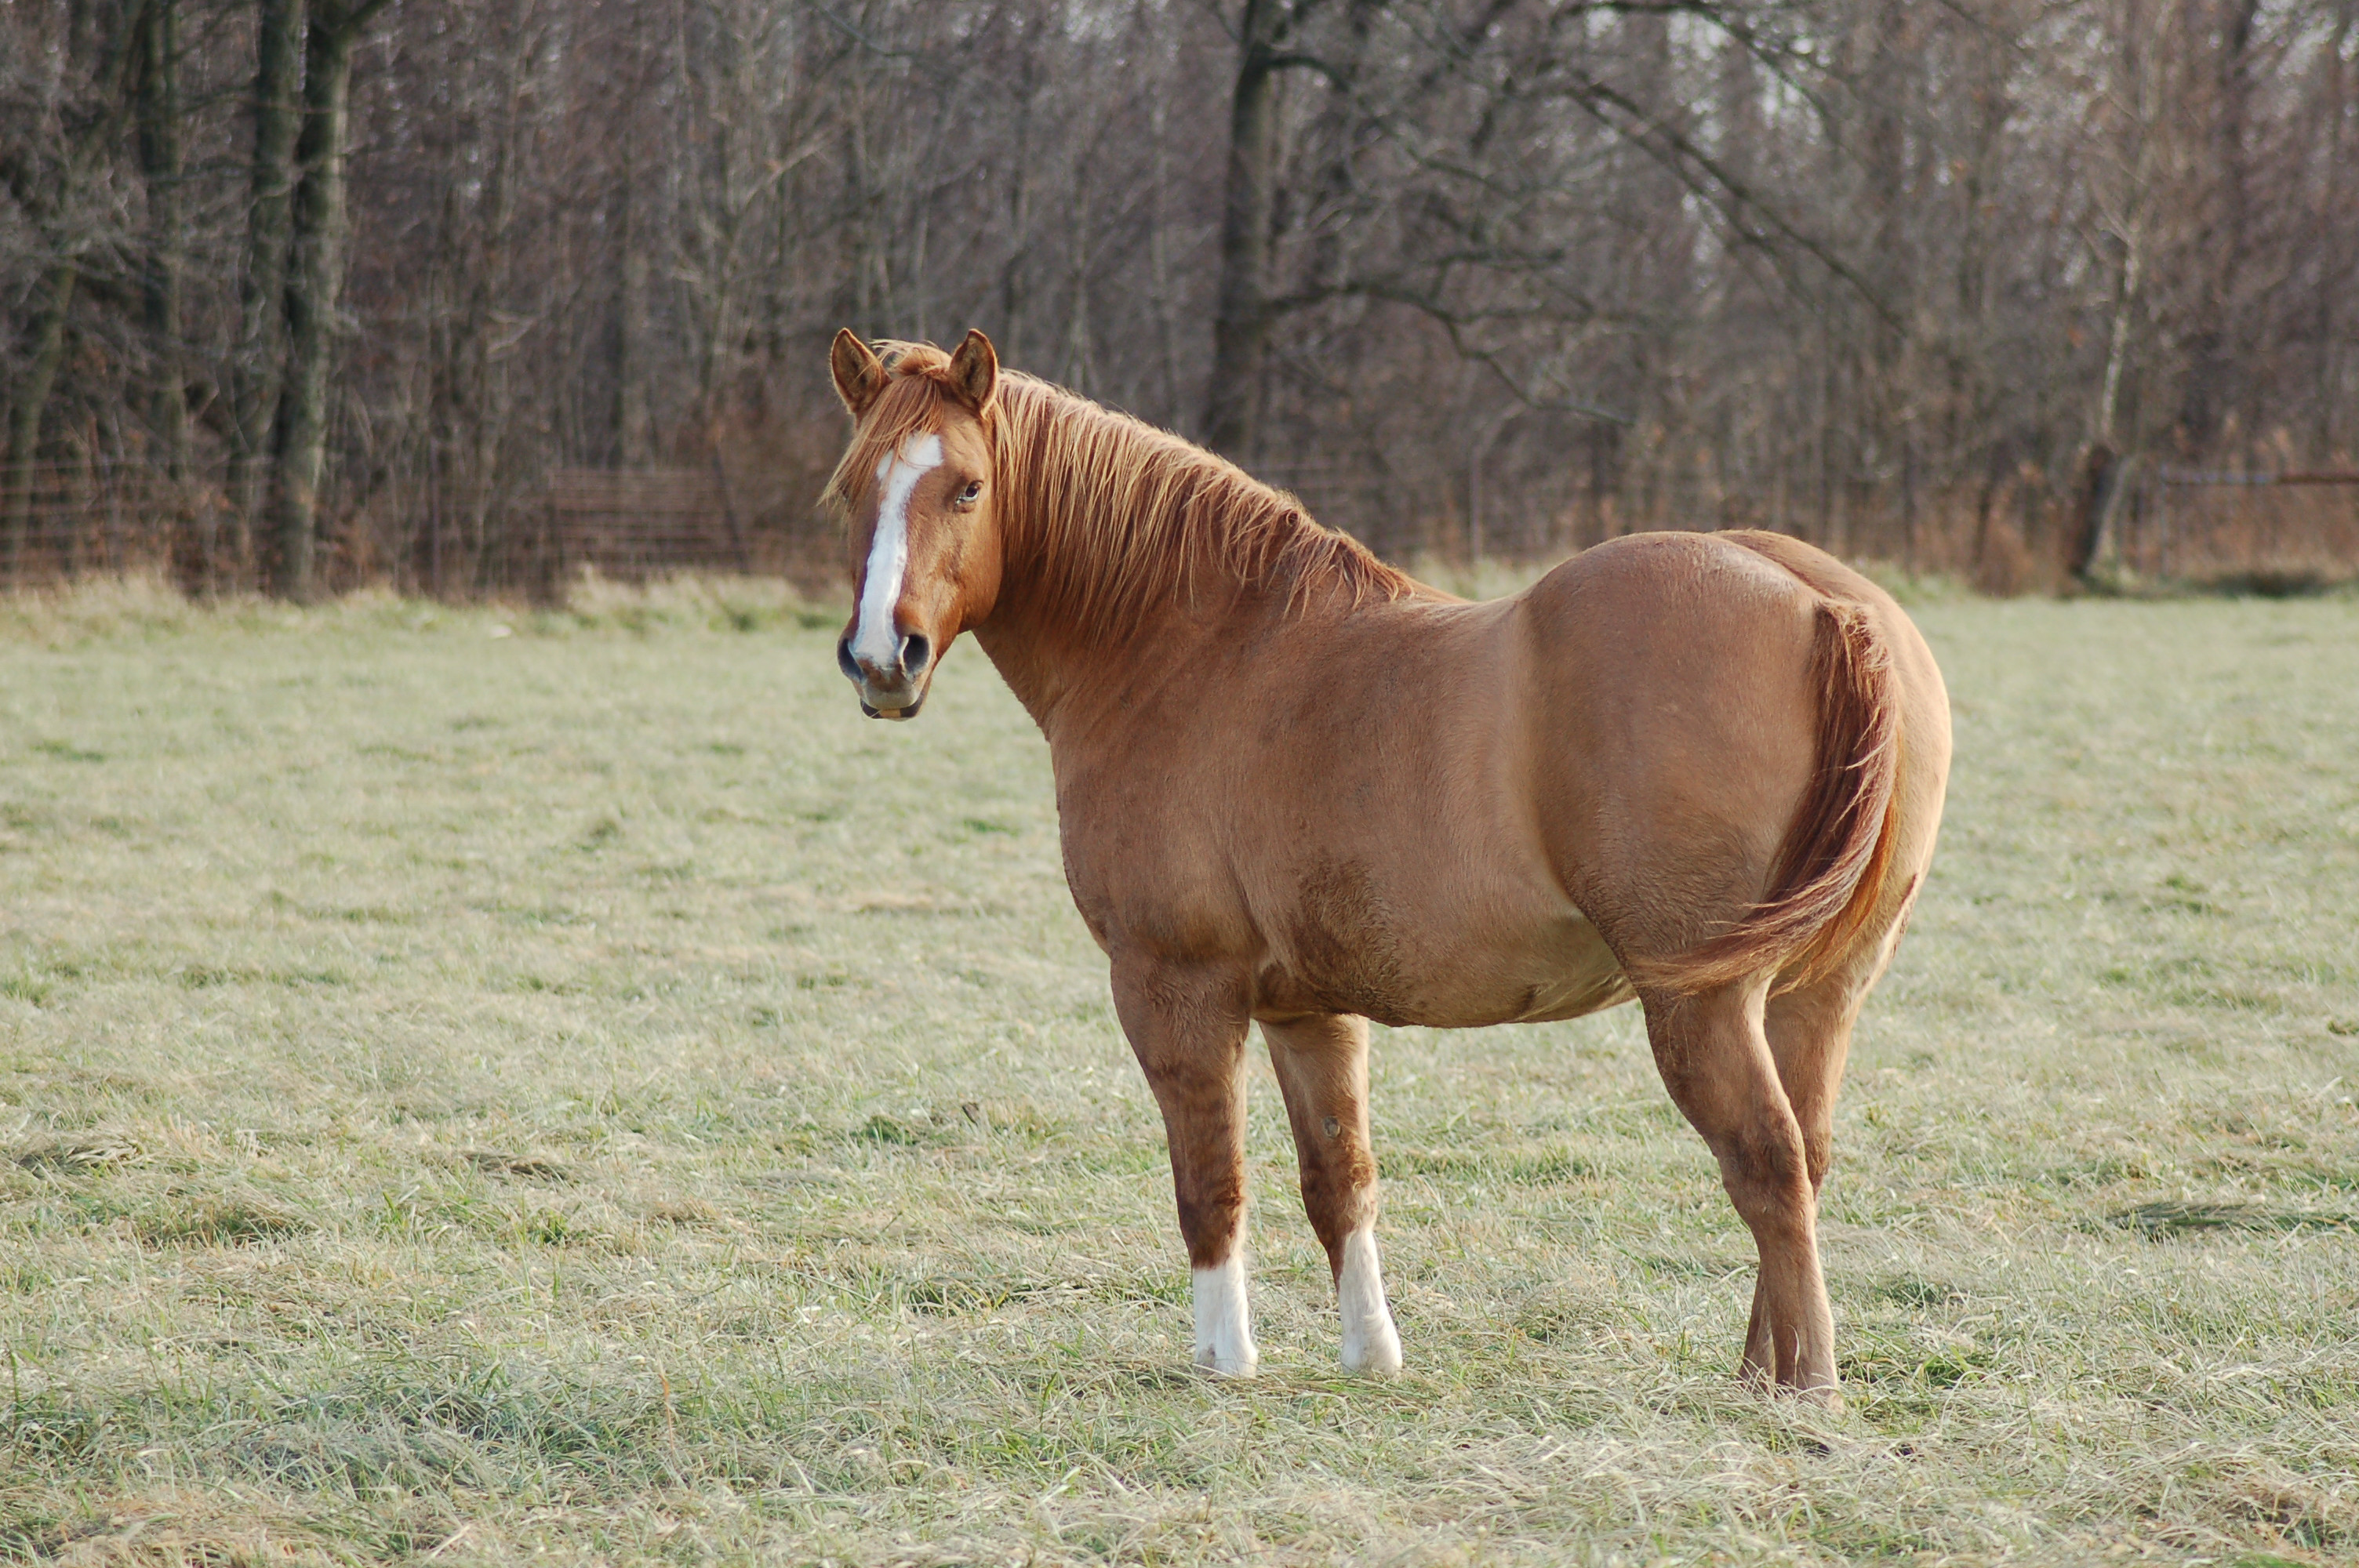 An obese horse standing in a field 